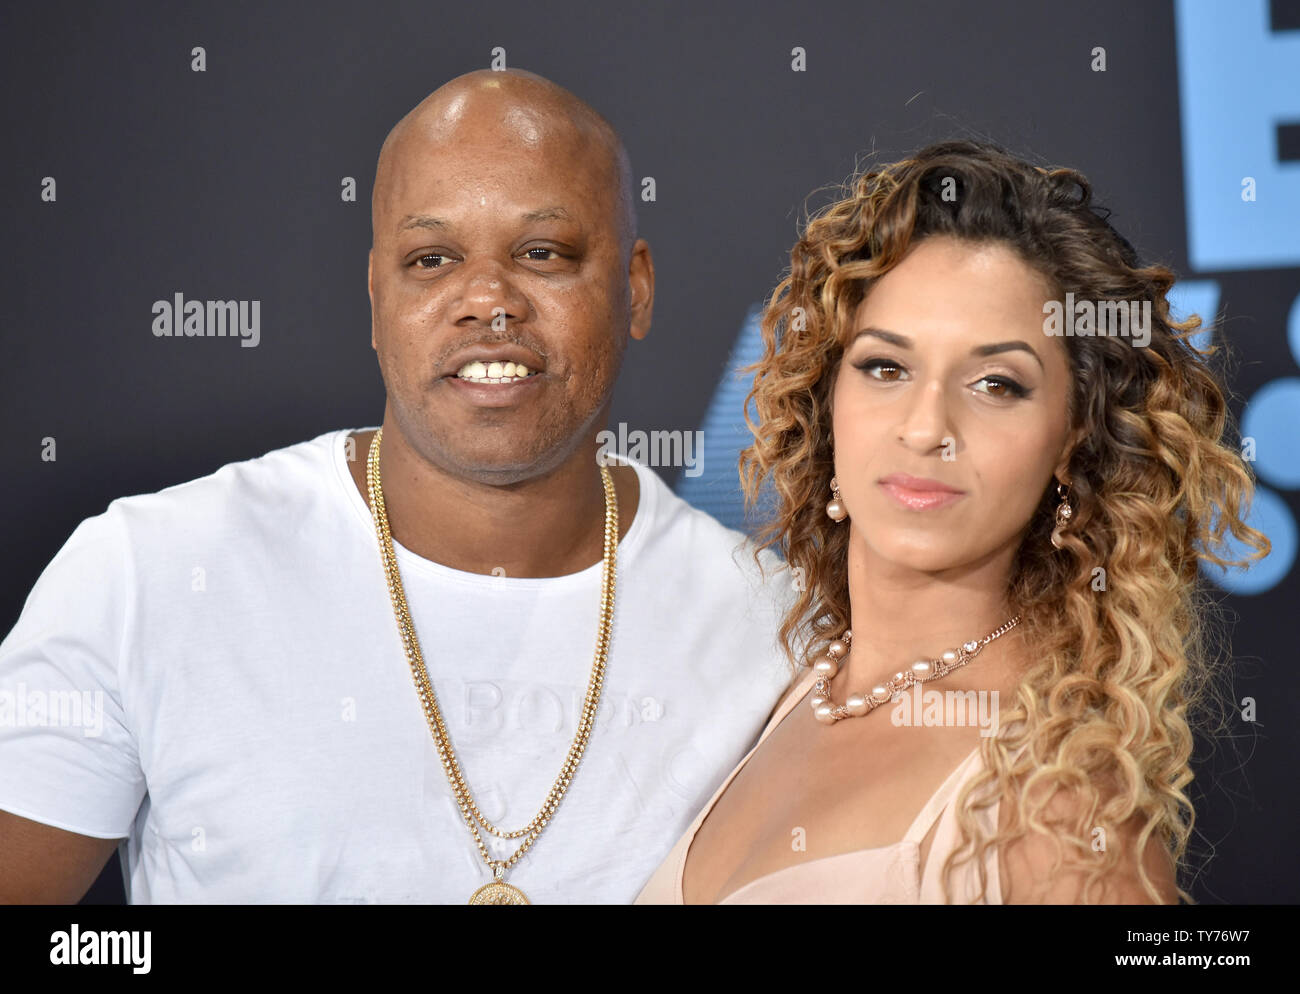 Rapper Too Short (L) and guest attend the 17th annual BET Awards